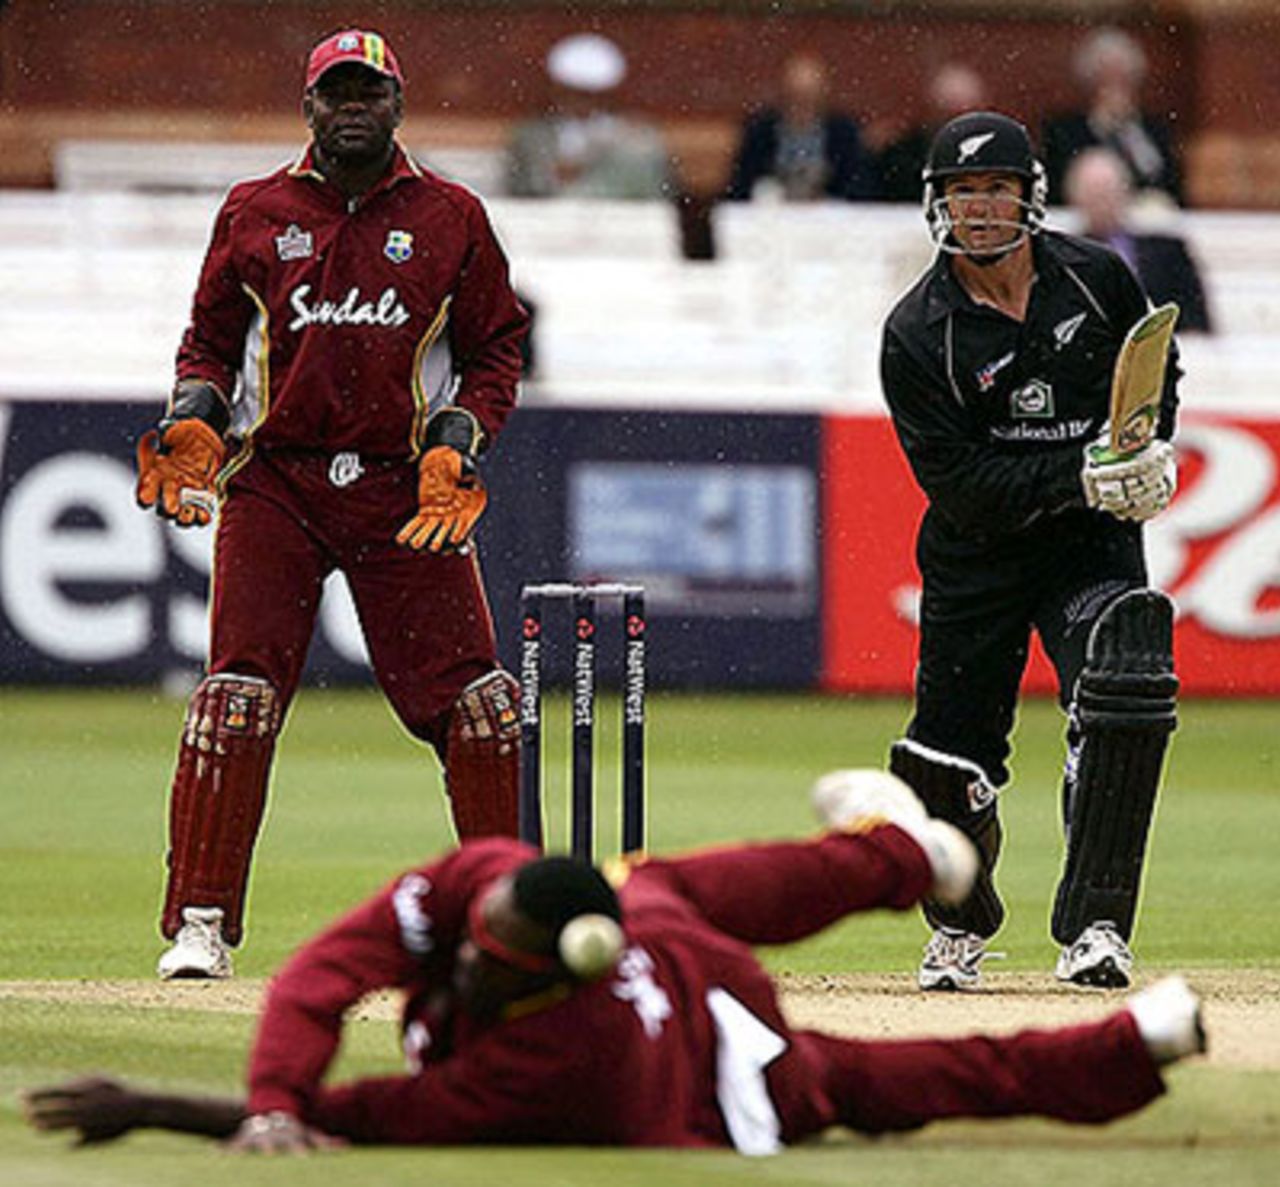 Nathan Astle drives Dwayne Bravo, New Zealand v West Indies, Lord's, July 10, 2004